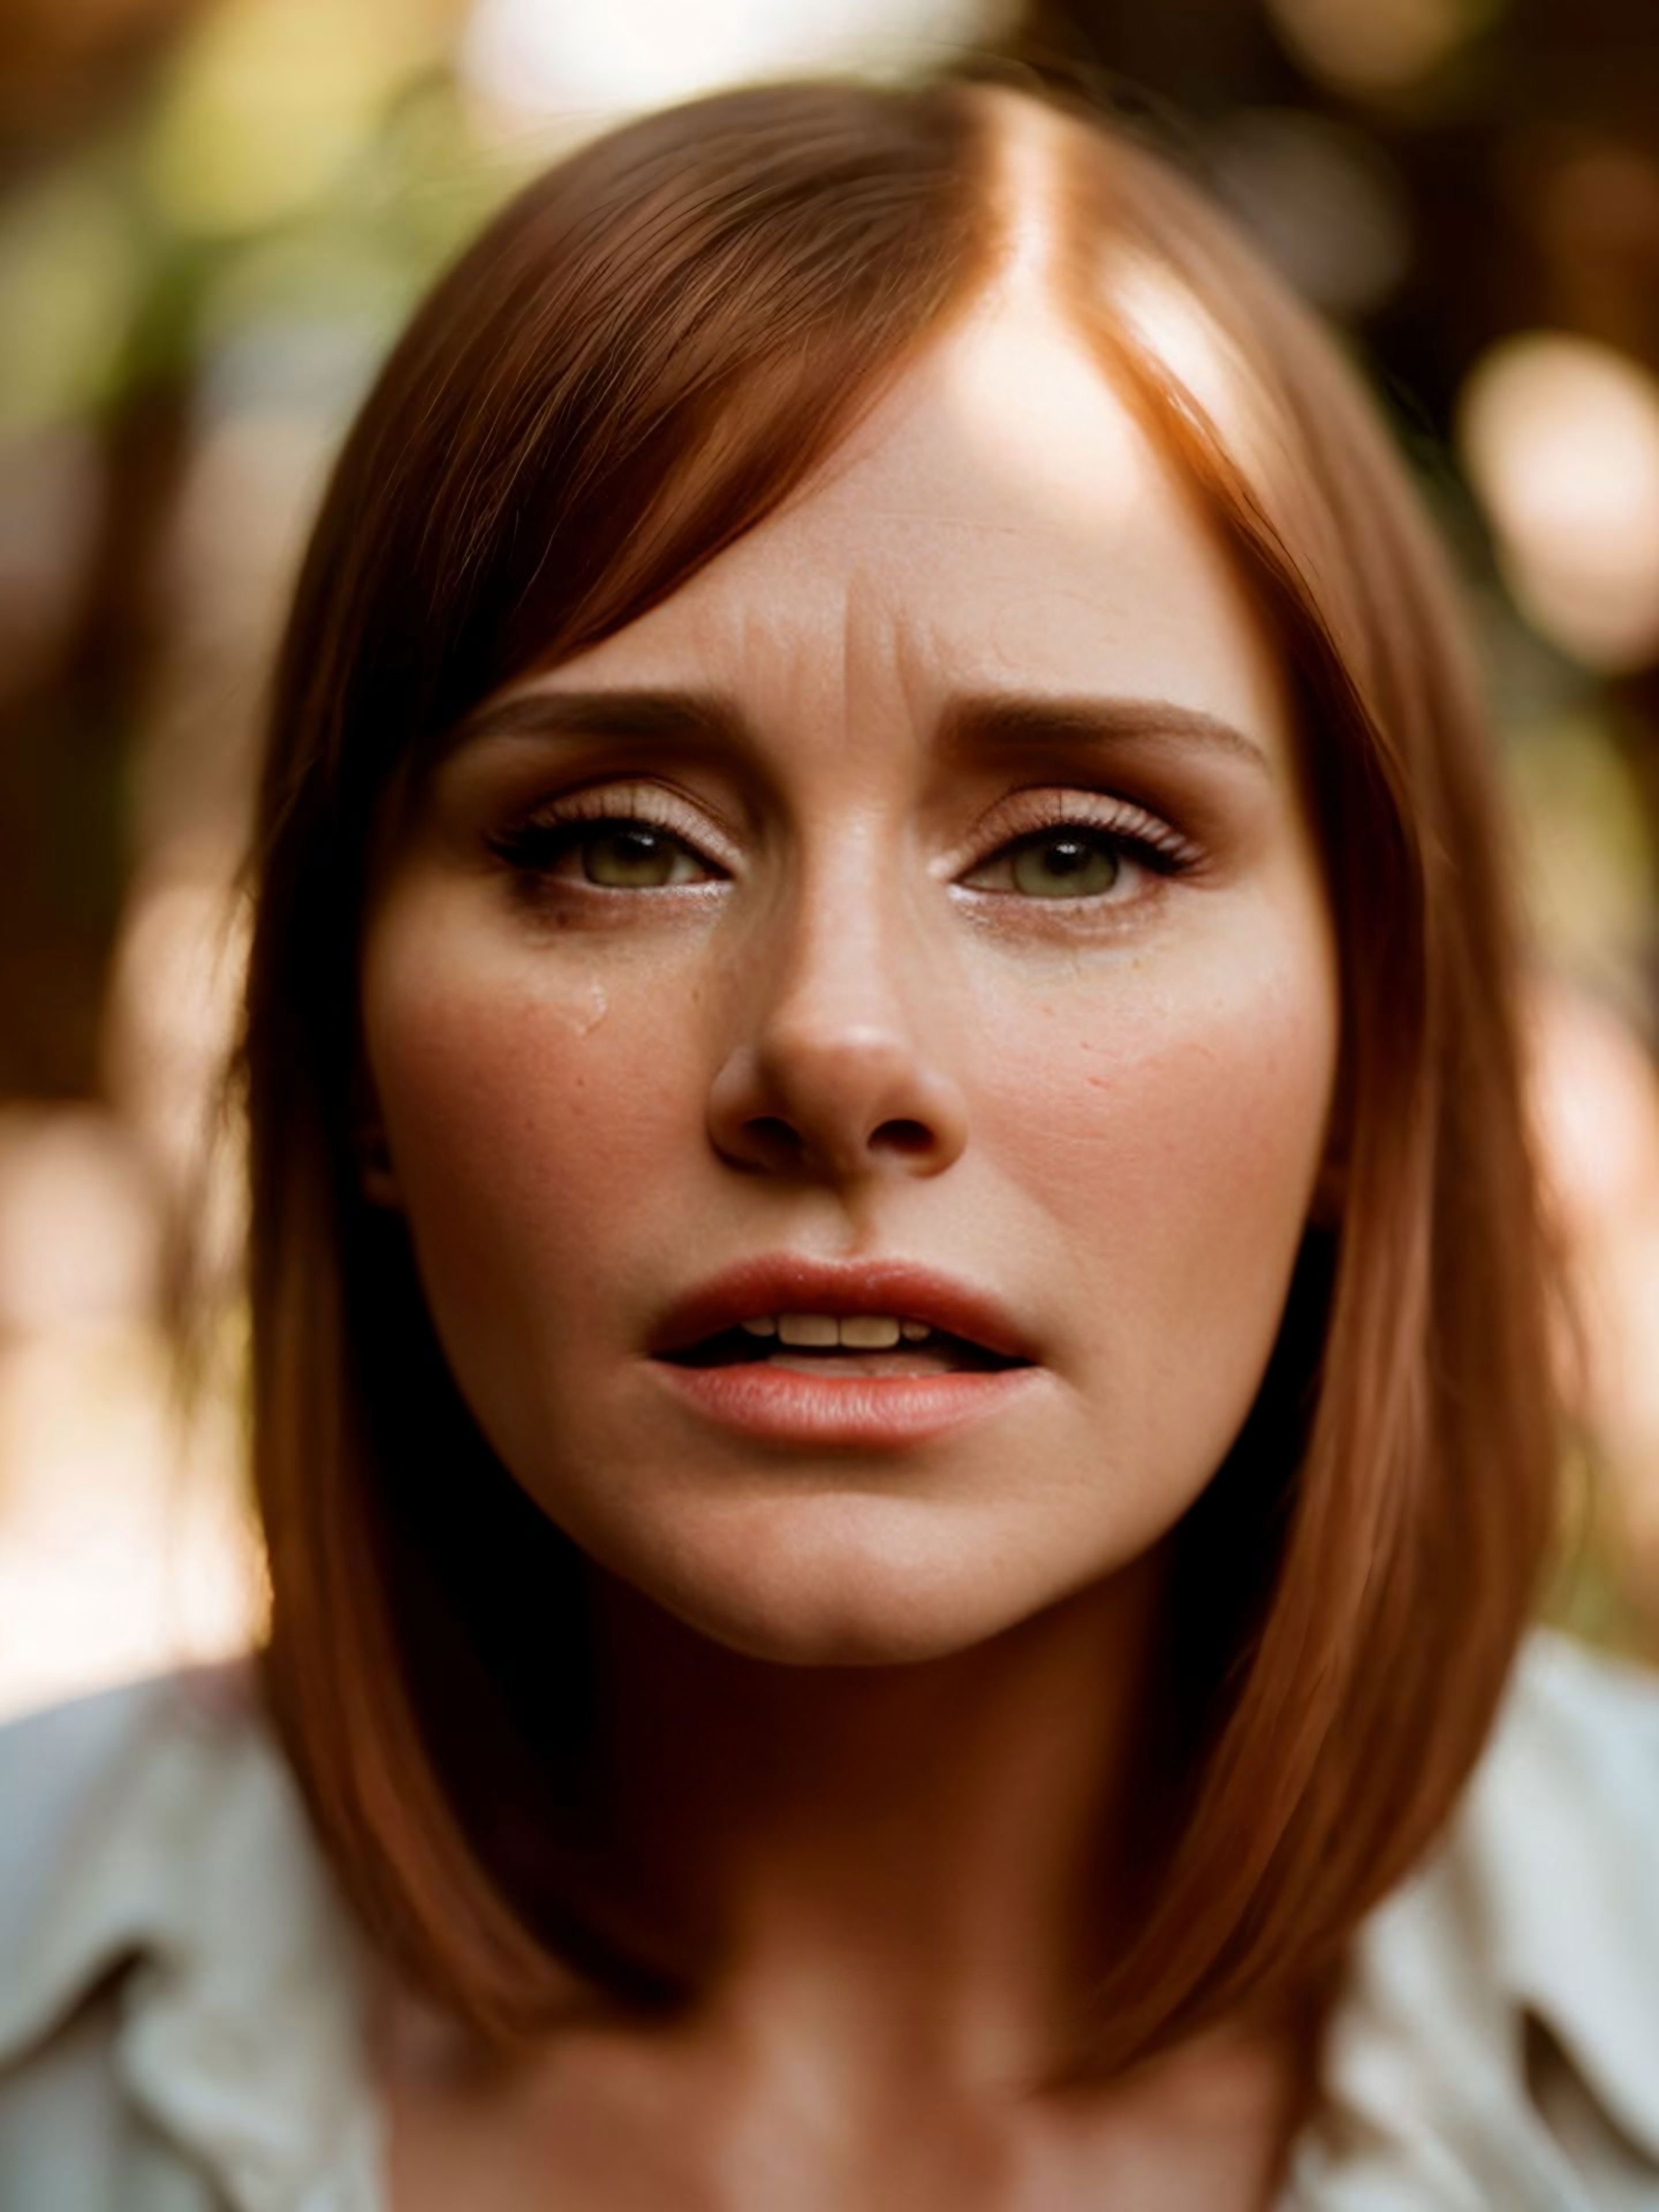 Bryce Dallas Howard image by TheLoraCollective